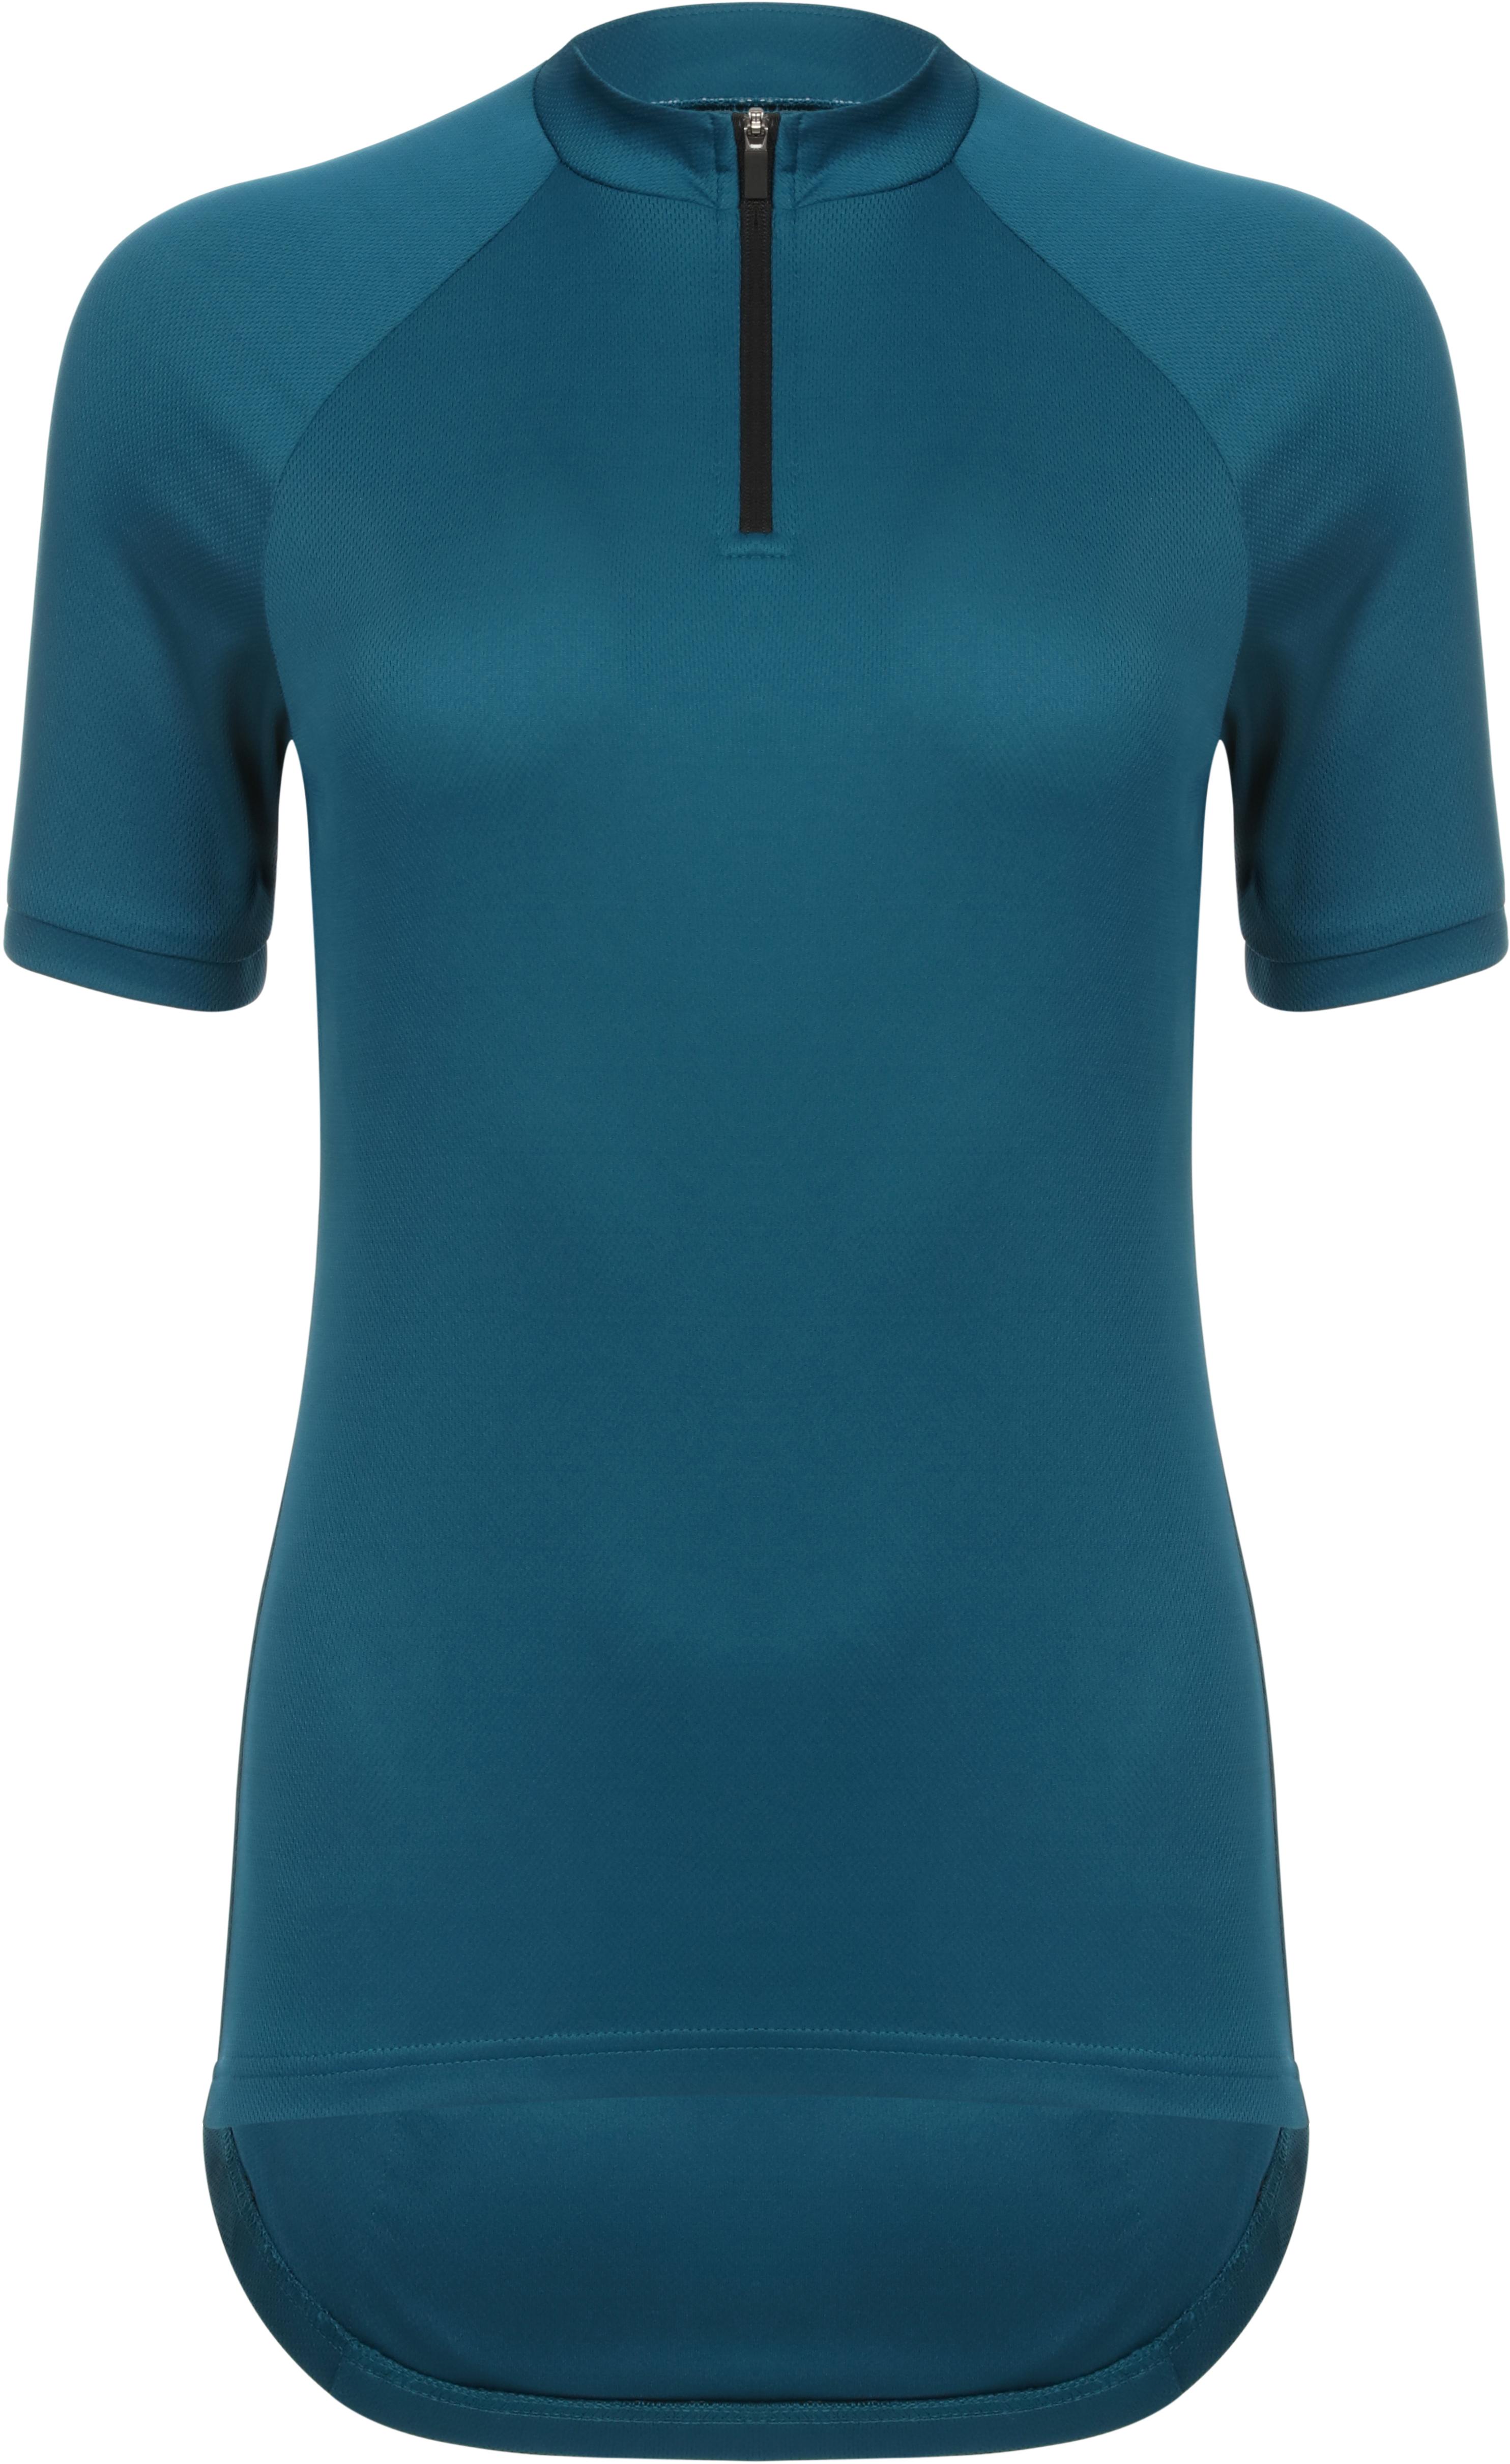 Halfords Ridge Womens Cycling Jersey - Teal 14